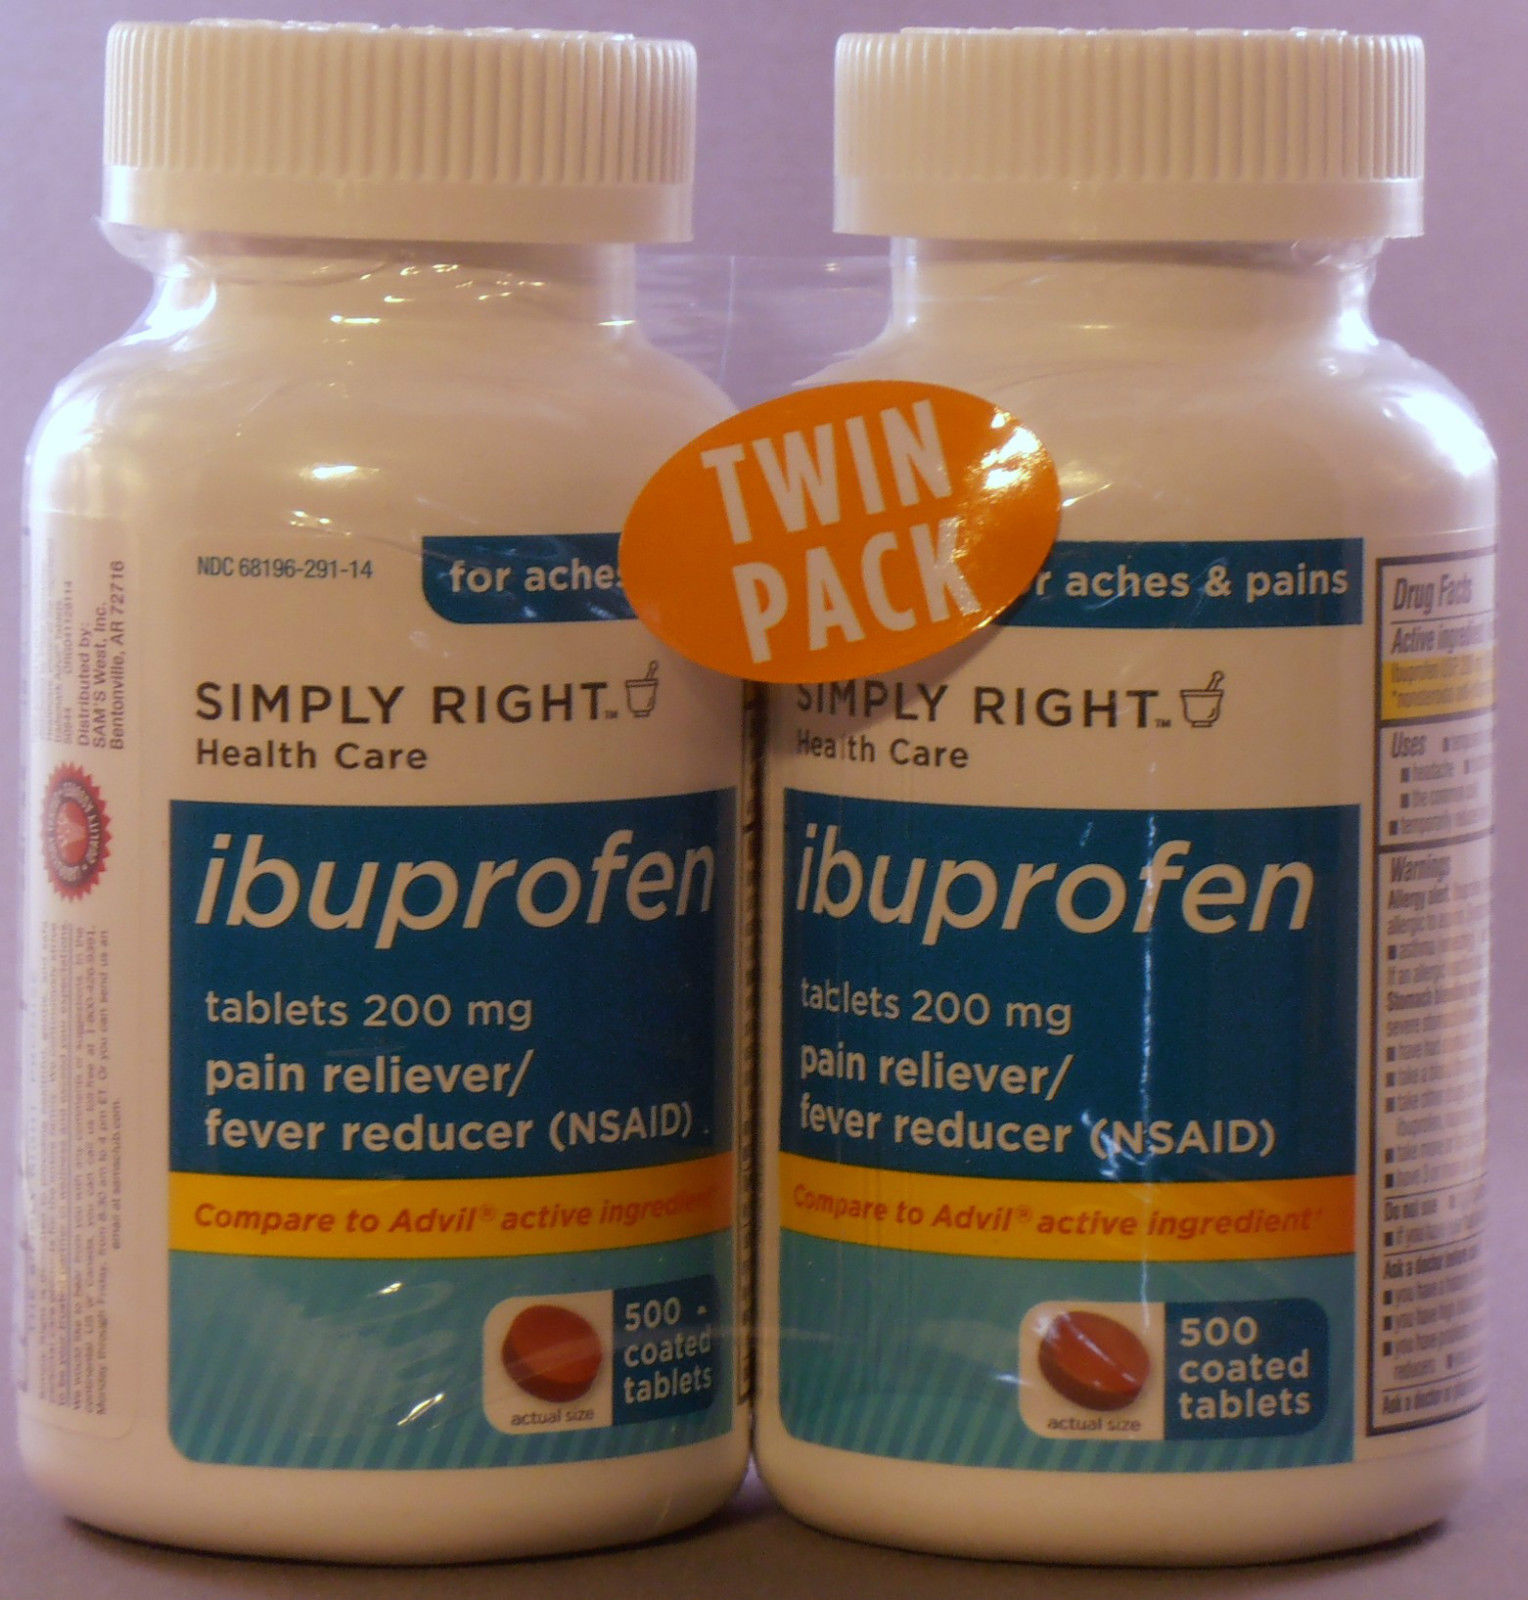 1000ct Generic Ibuprofen Pain / Fever Reducer 200mg (NSAID) Coated Tablets NEW -- US Delivery